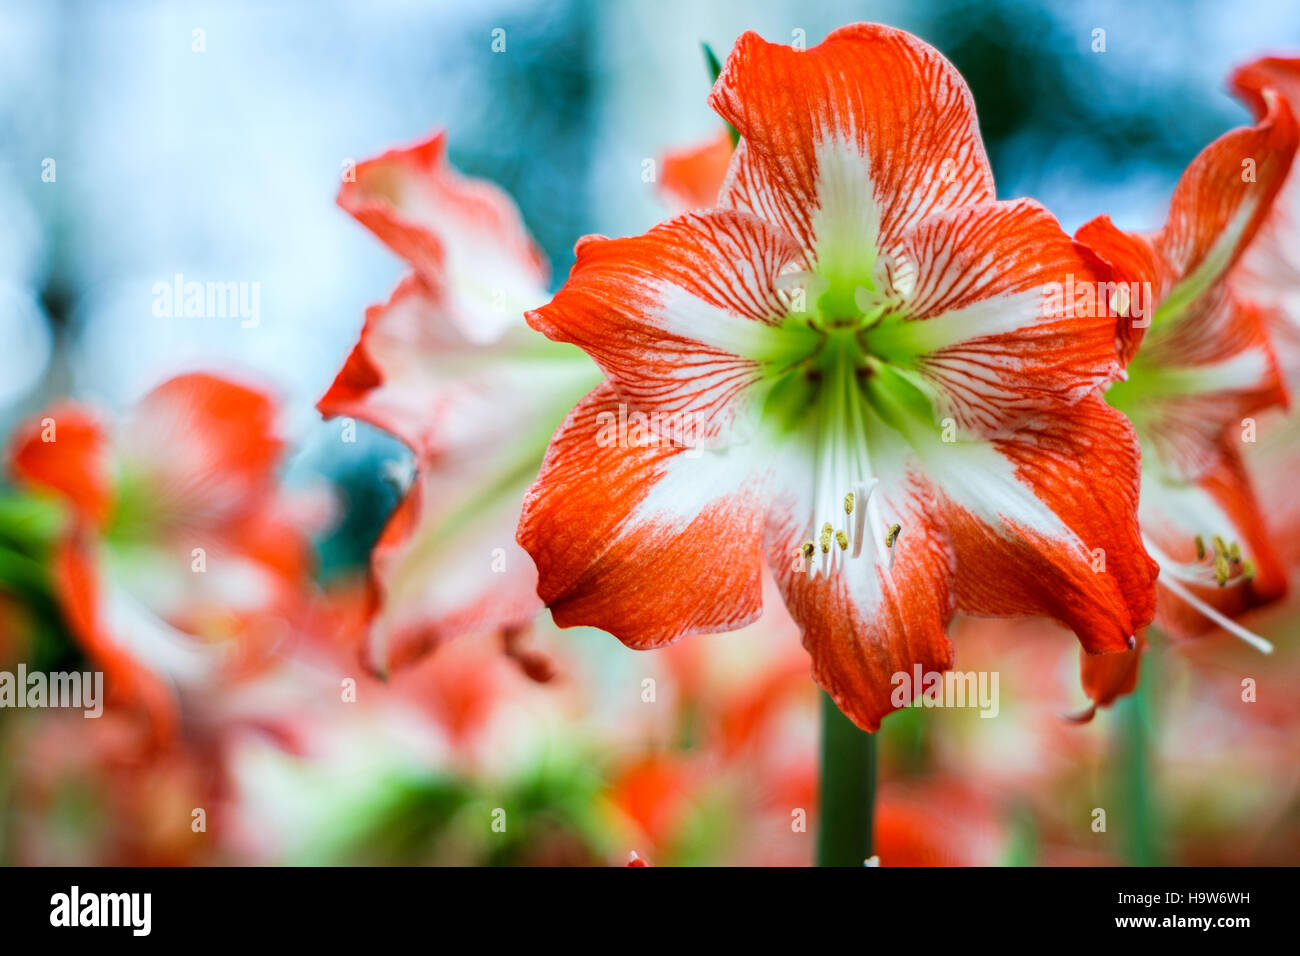 Hippeastrum Amaryllis red flowers on the trees Stock Photo